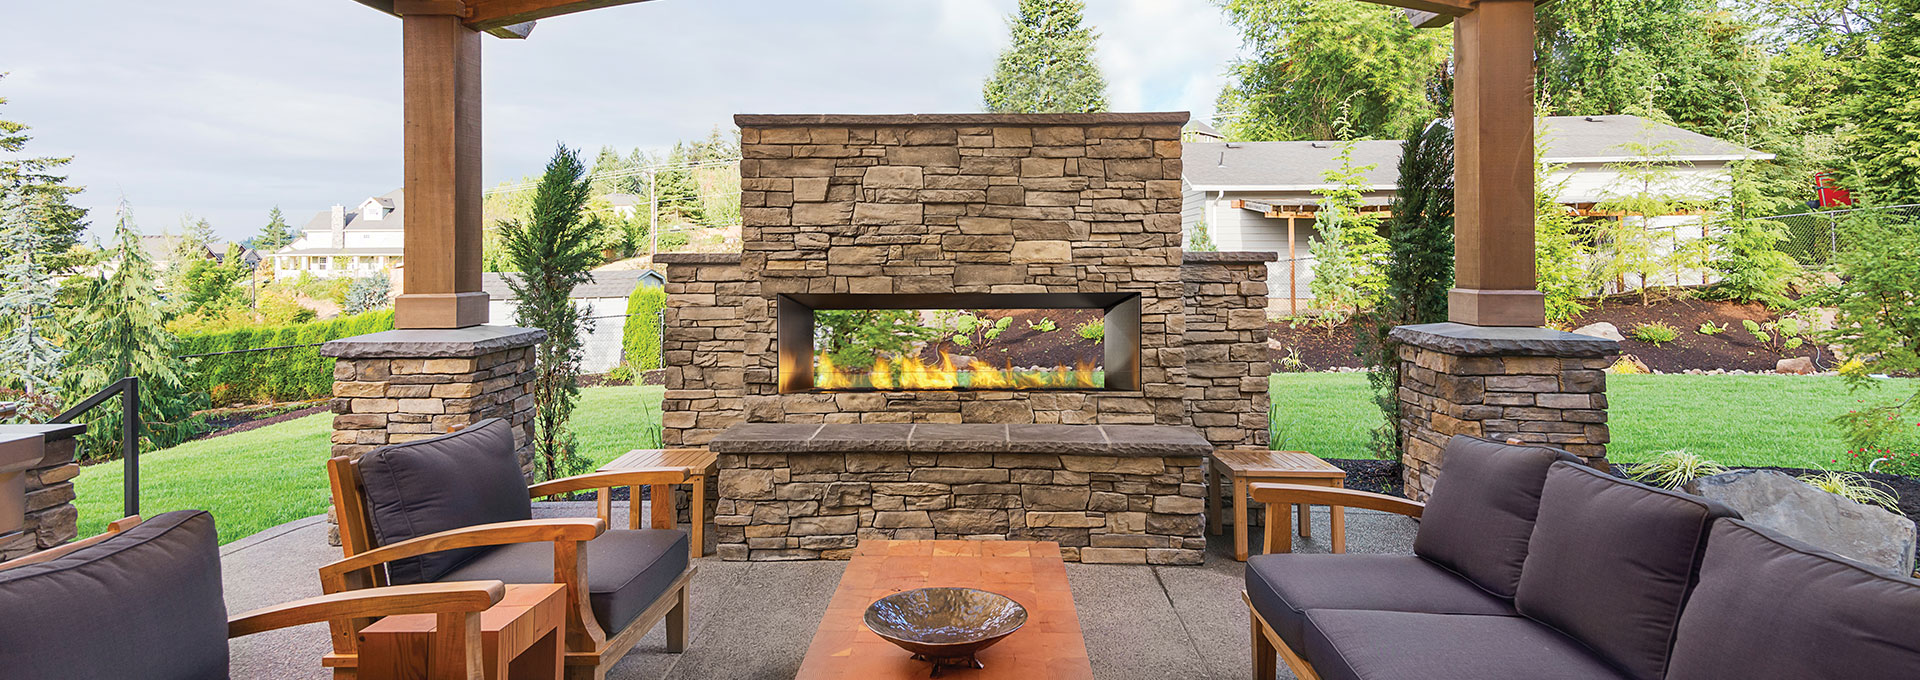 Outdoor Gas Fireplaces Fireplace Kits, Outdoor Propane Fireplaces Canada